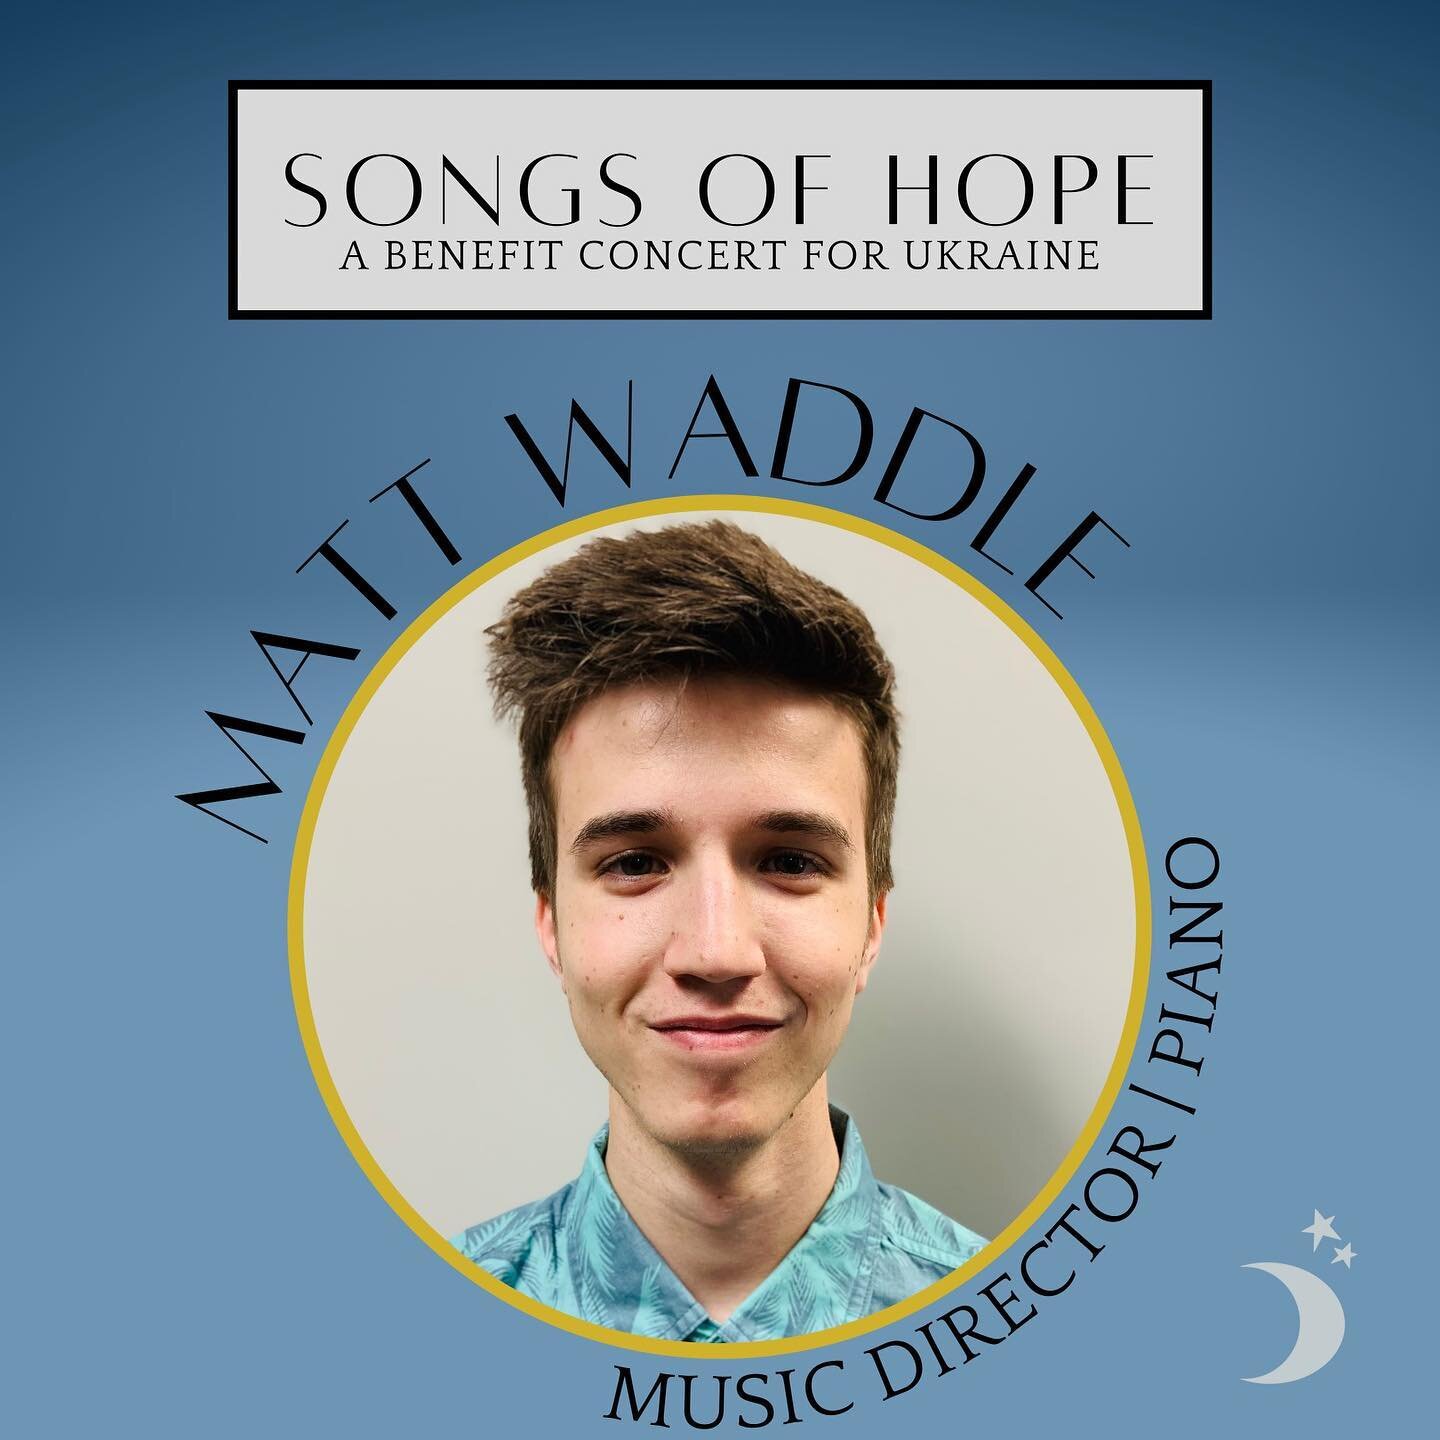 Meet our Music Director and pianist for Songs of Hope, Matthew Waddell!  Despite his young age Matthew is an accomplished pianist having worked his way through the curriculum of the Royal Conservatory of Music and gone on to perform for beautiful eve